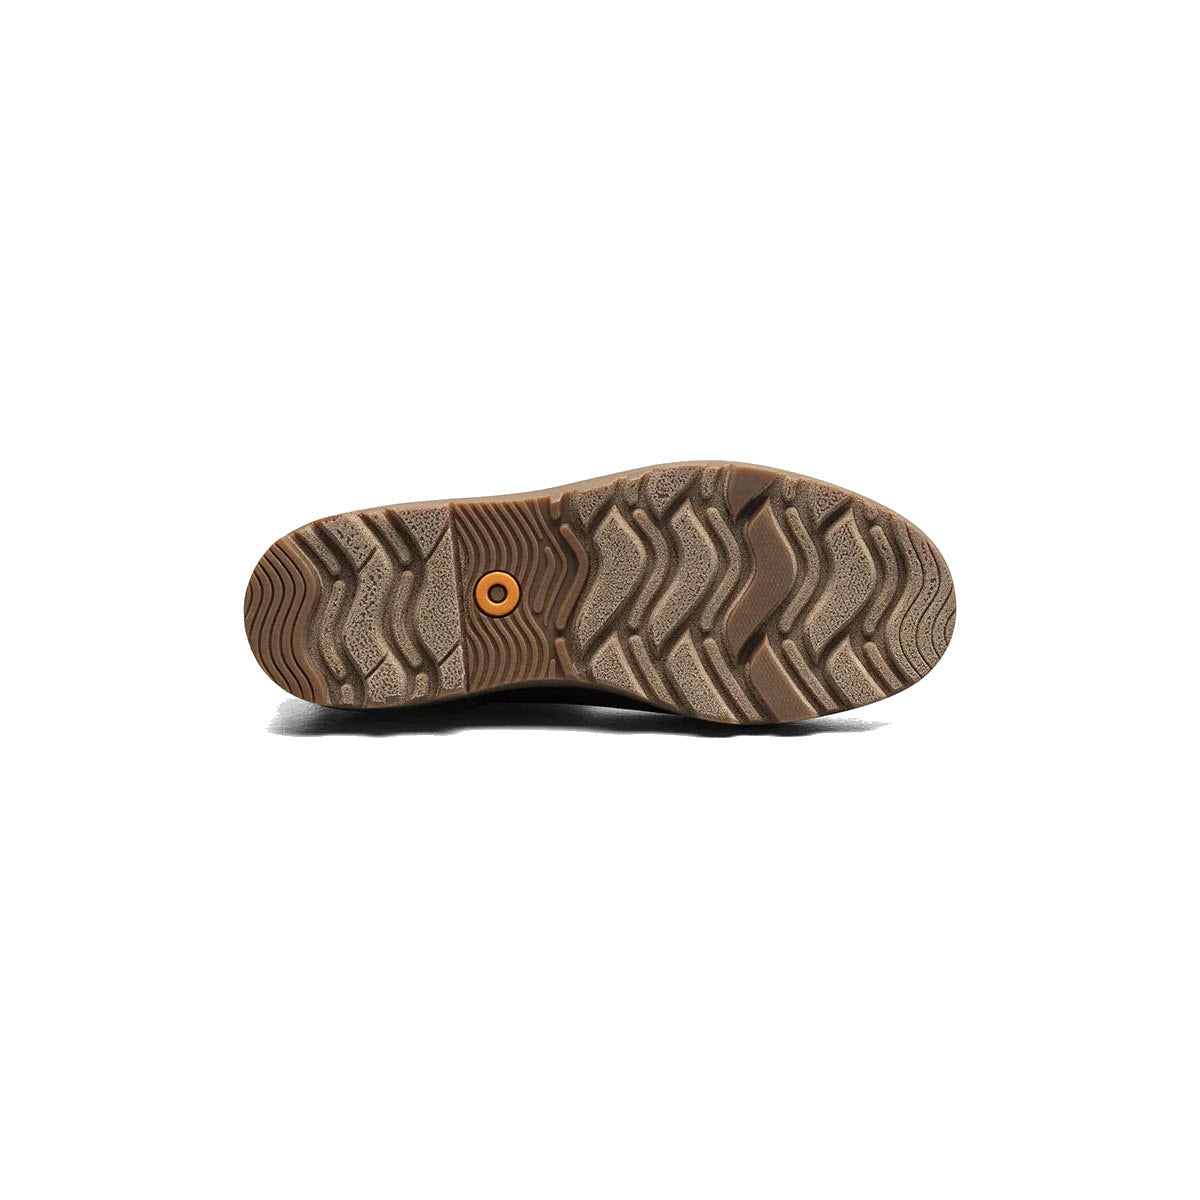 Sole of a shoe featuring Bogs Rebound Cushioning with a wavy tread pattern and a circular orange logo in the center, displayed against a white background.